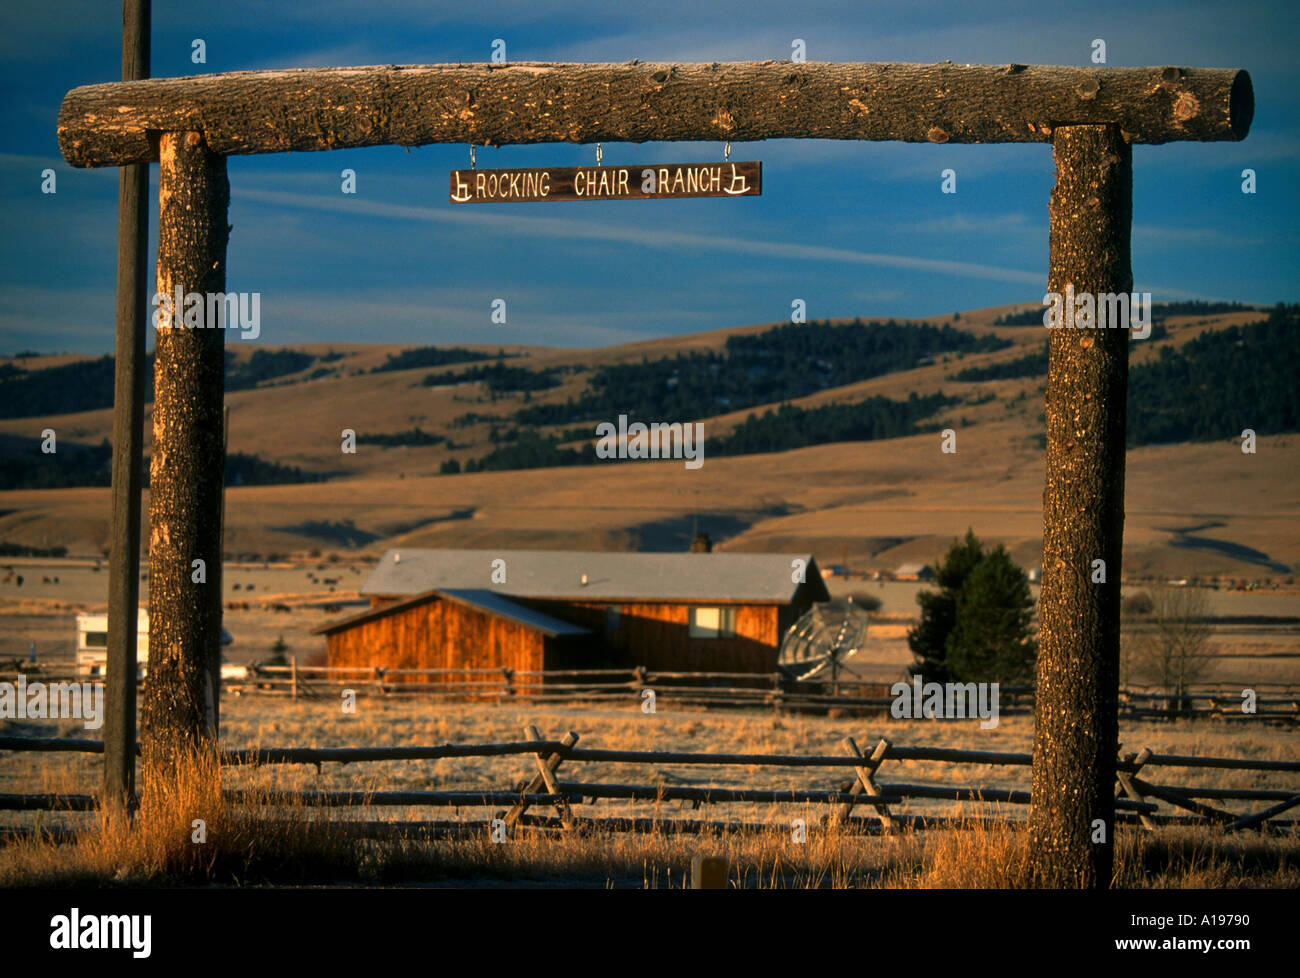 Ranch gate to Rocking Chair Ranch near Philipsburg Granite County west Montana USA R Francis Stock Photo